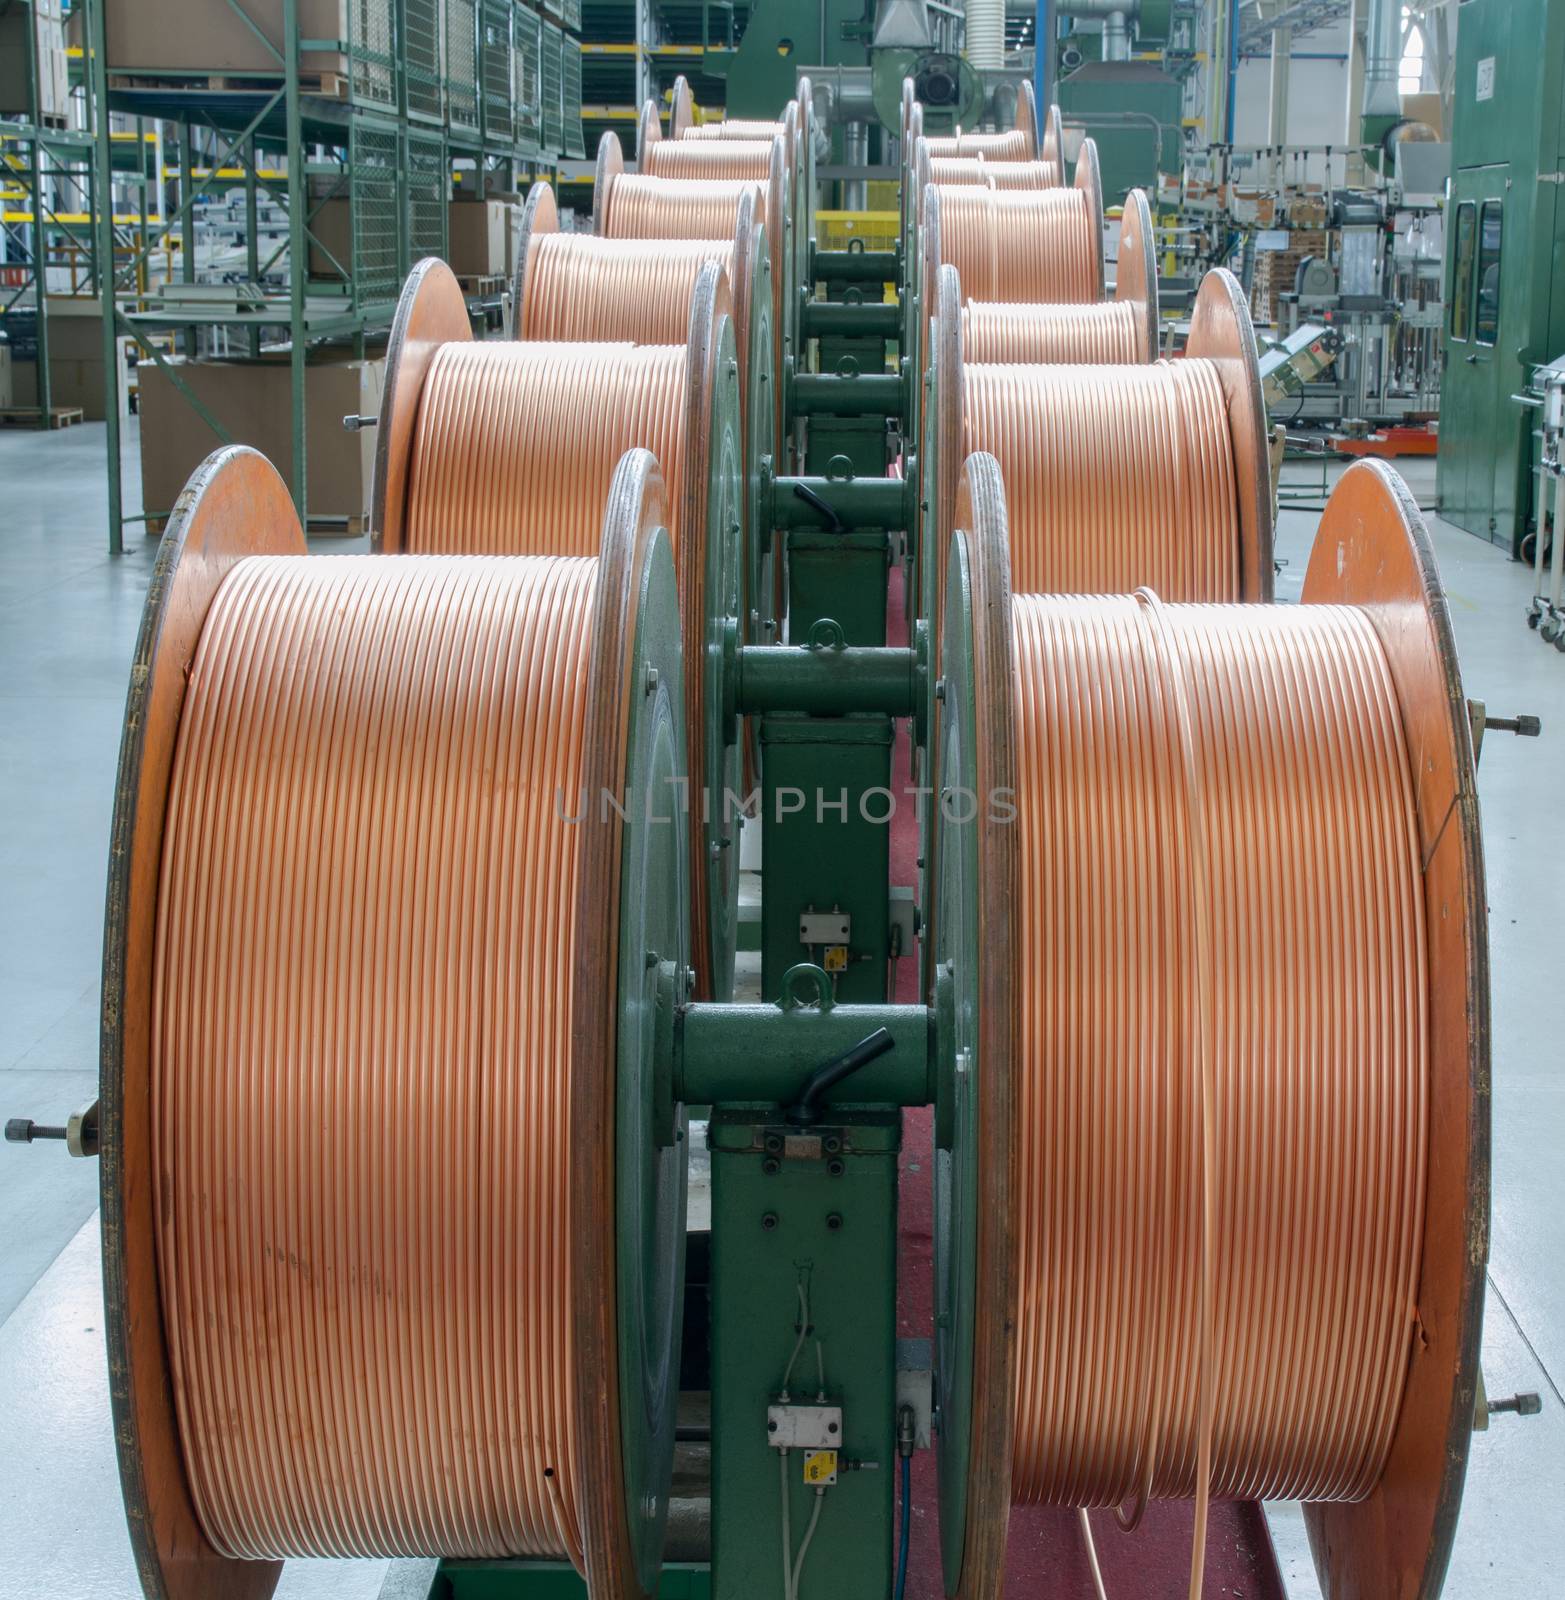 copper tubes for bending machine by Isaac74